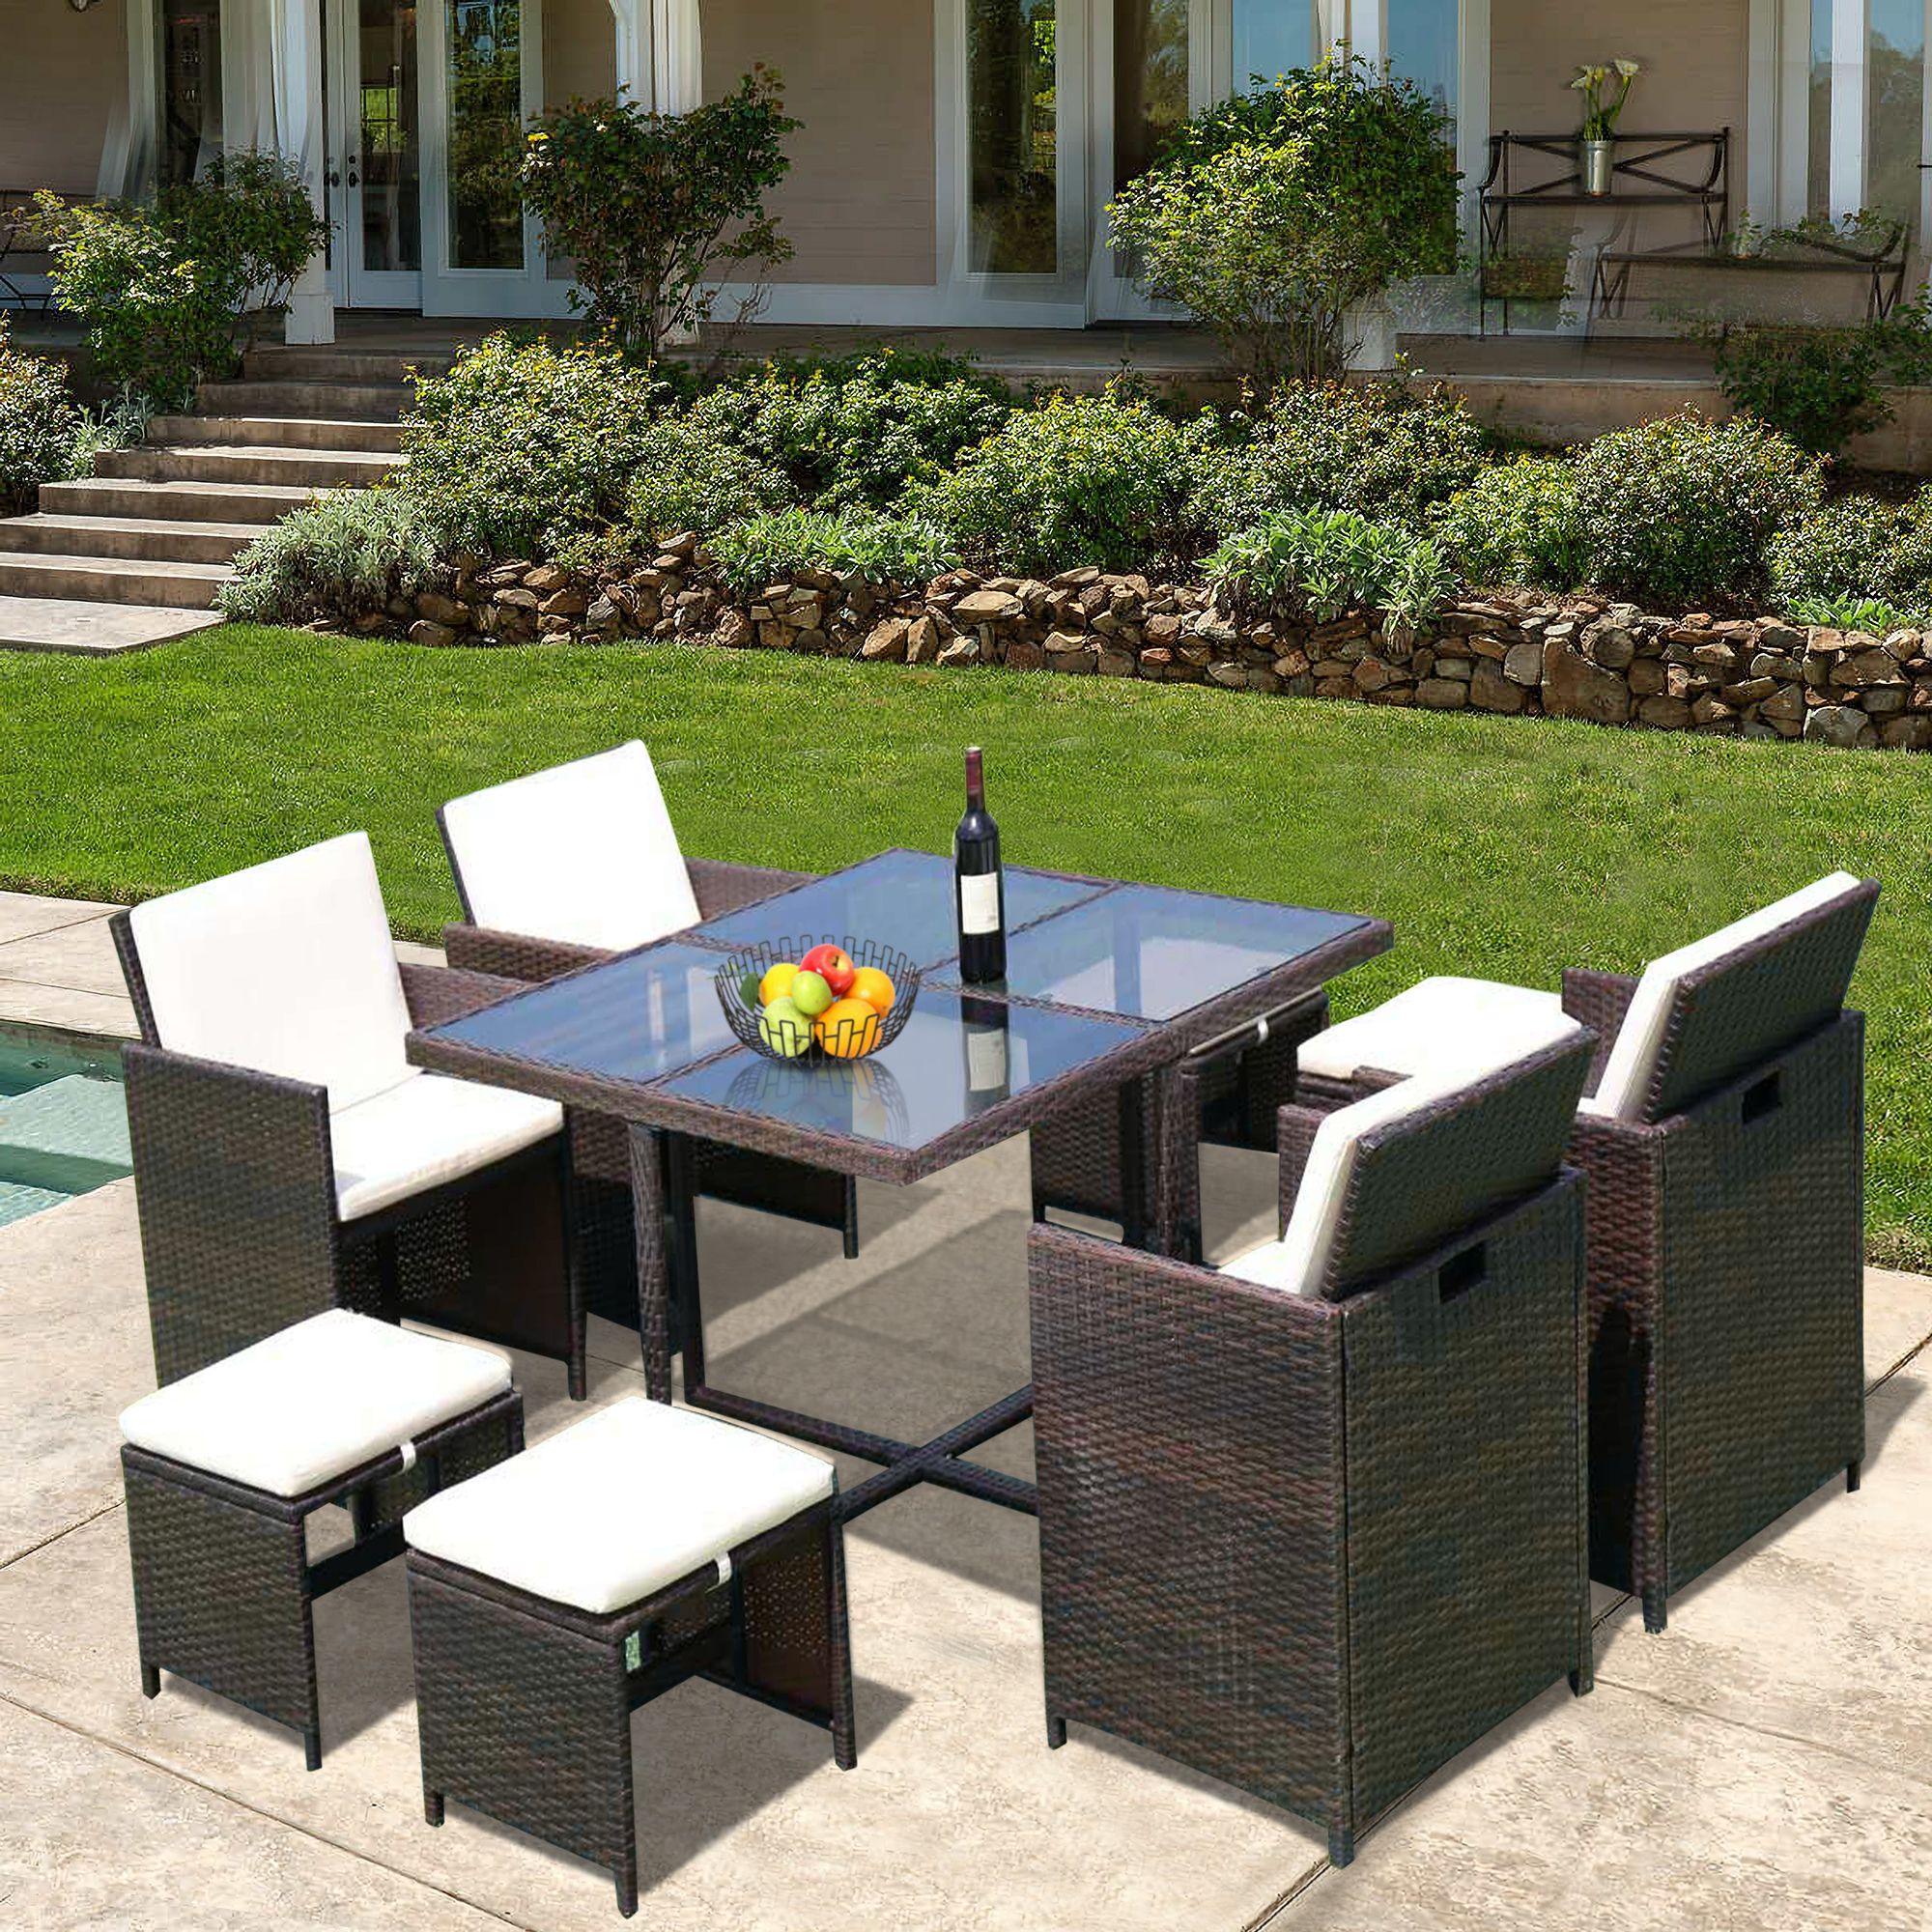 Clearance! 9 Piece Indoor Outdoor Wicker Dining Set Furniture, Patio With Regard To 2019 9 Piece Patio Dining Sets (View 9 of 15)